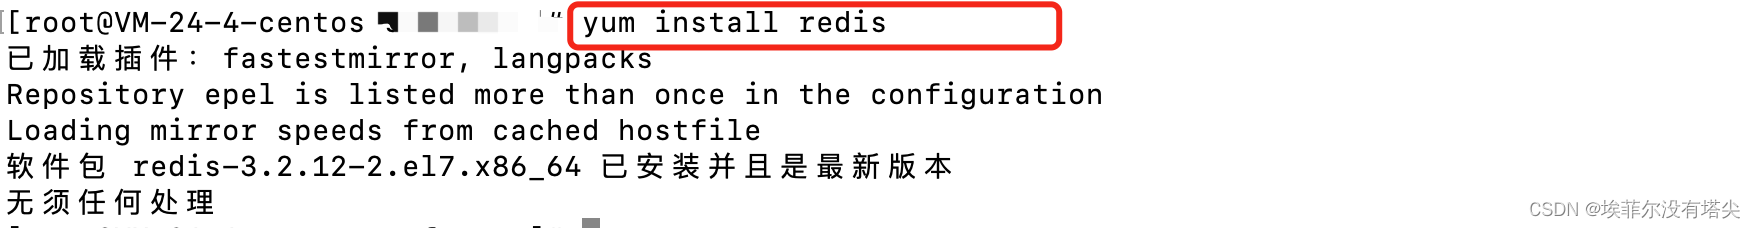 <span style='color:red;'>centos</span>7 linux<span style='color:red;'>下</span>yum<span style='color:red;'>安装</span><span style='color:red;'>redis</span>